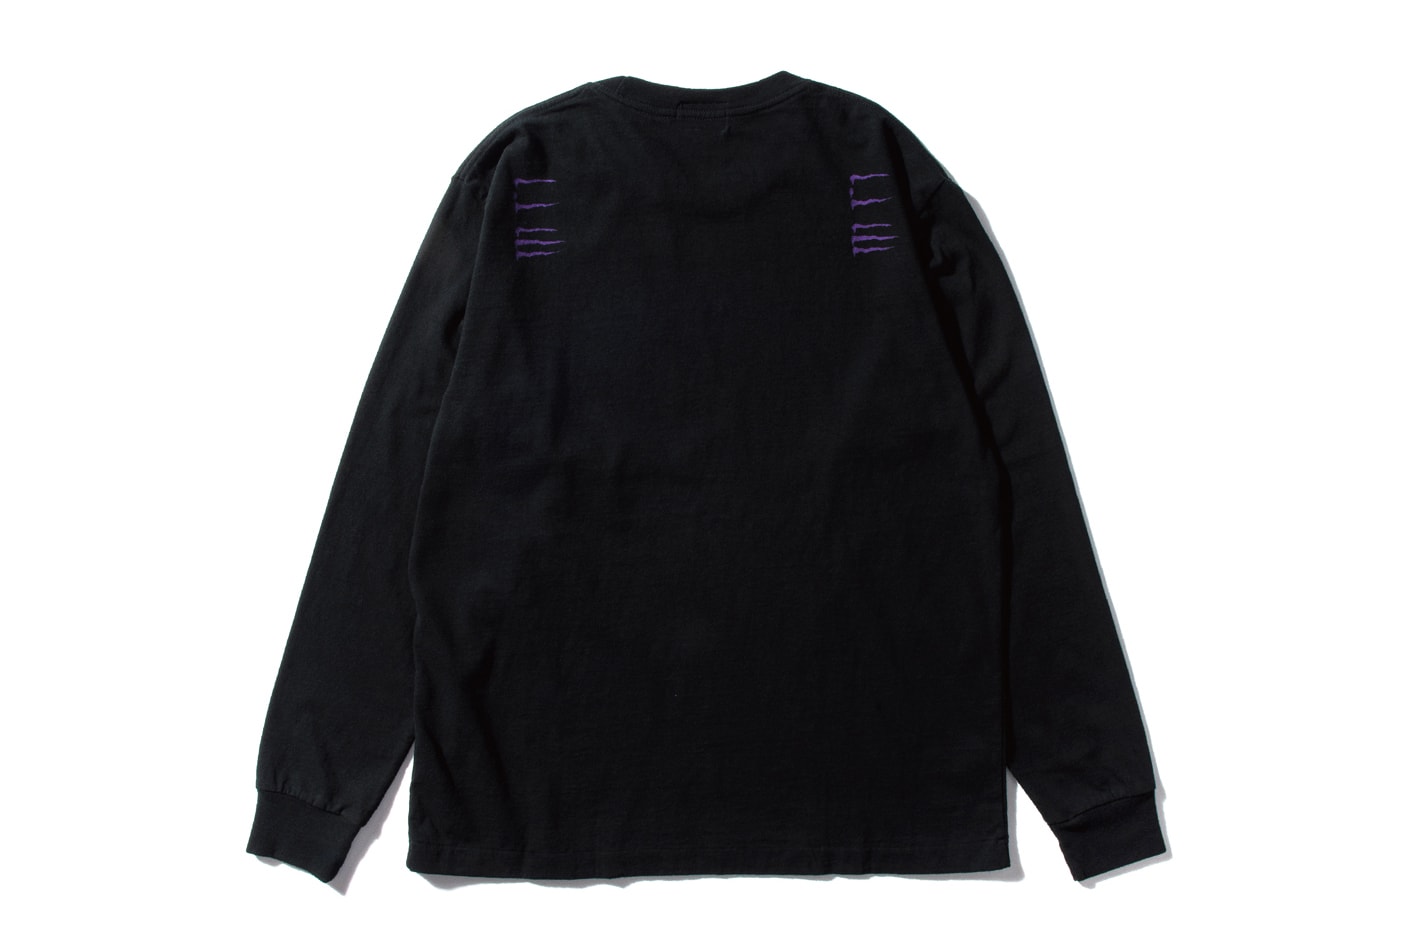 Cav Empt LAB Taipei Pop-Up T-shirt Hooded Top Collaboration